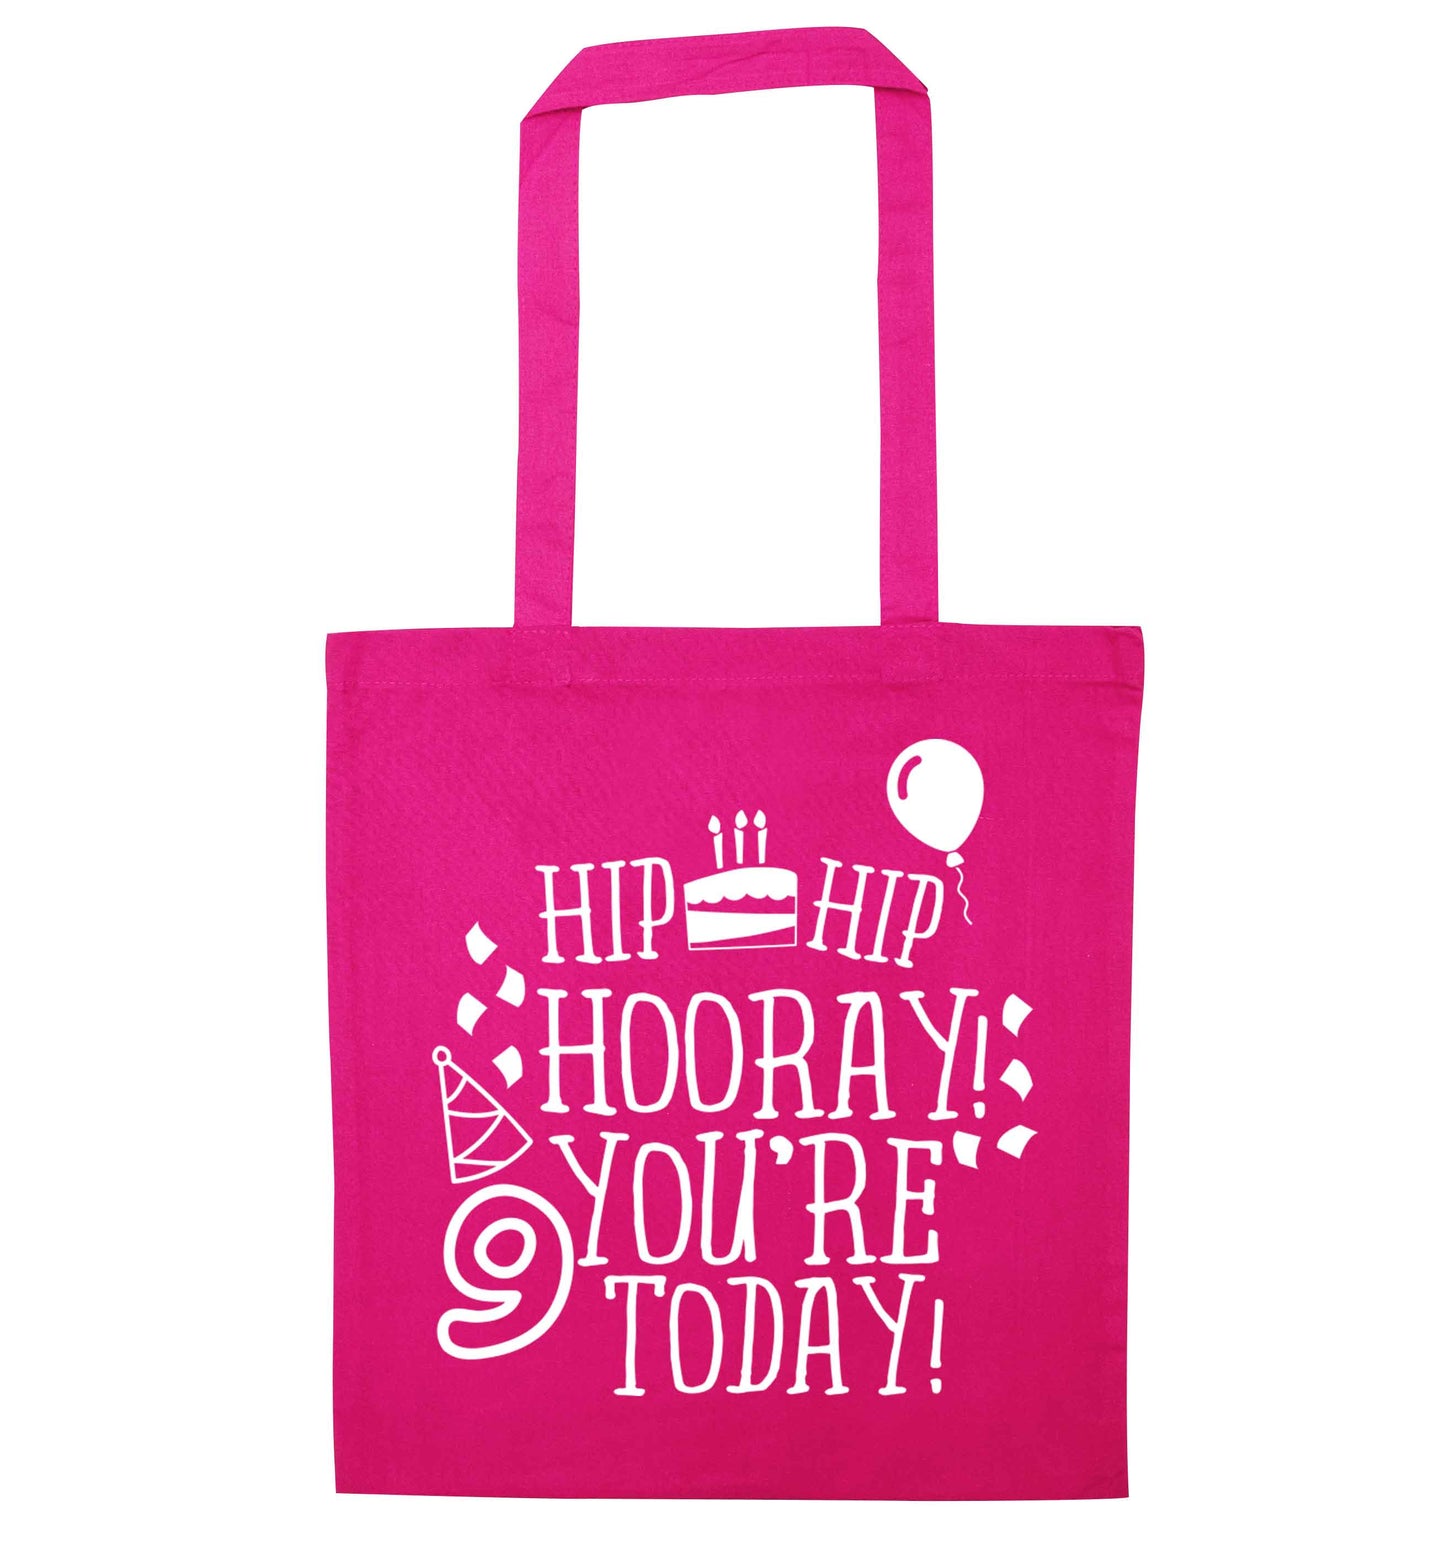 Hip hip hooray you're 9 today! pink tote bag